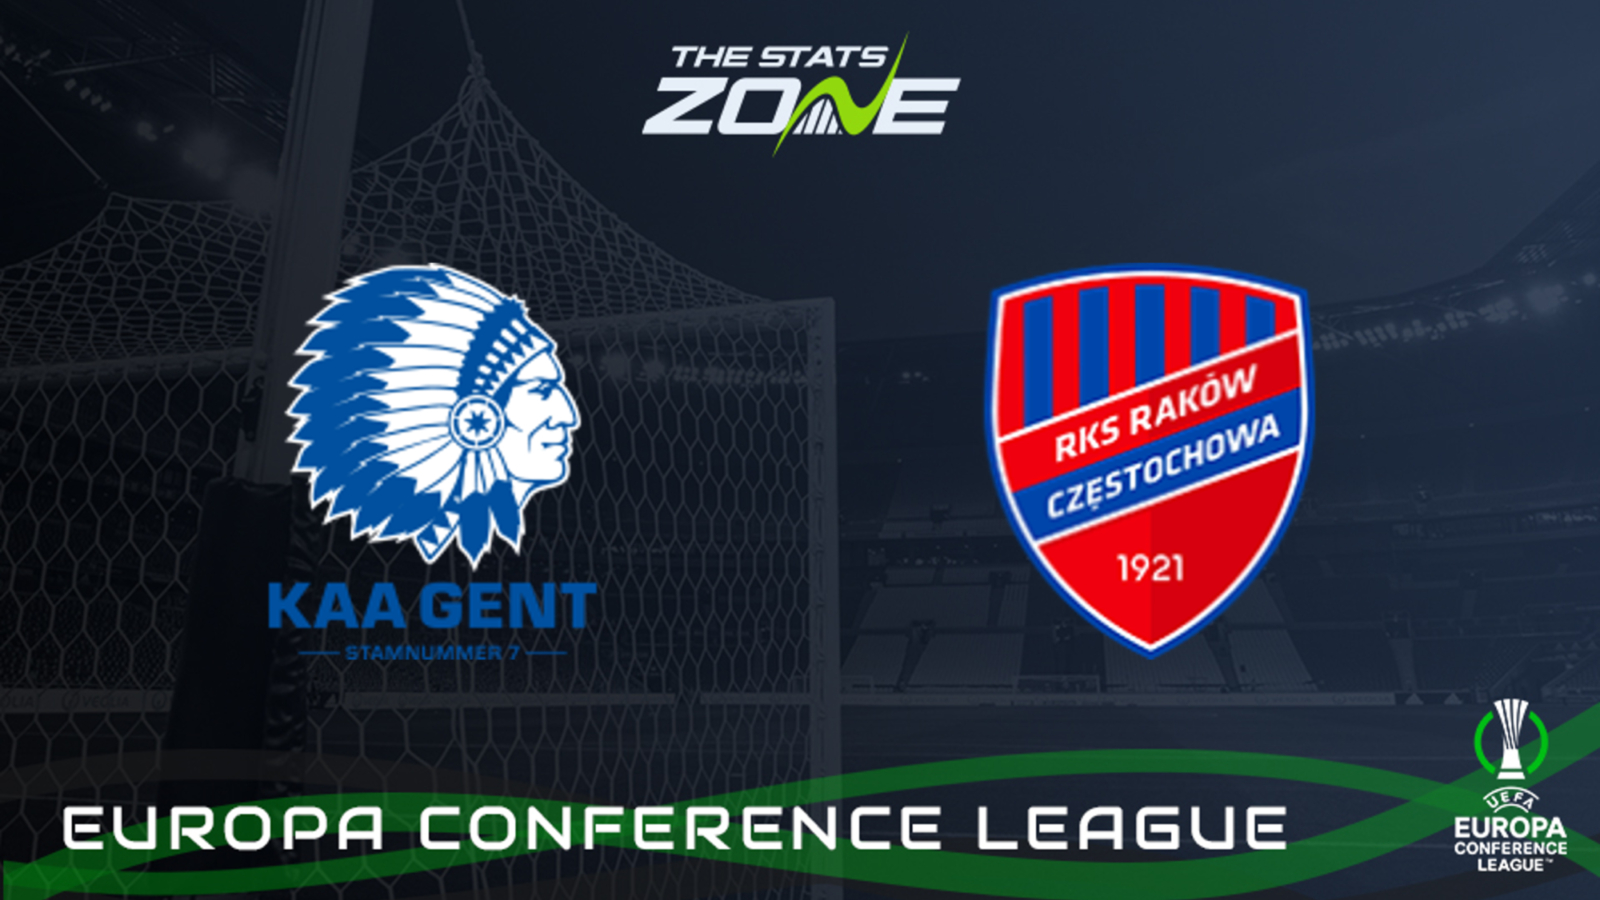 Play Off Round Second Leg Gent Vs Rakow Czestochowa Preview Prediction The Stats Zone